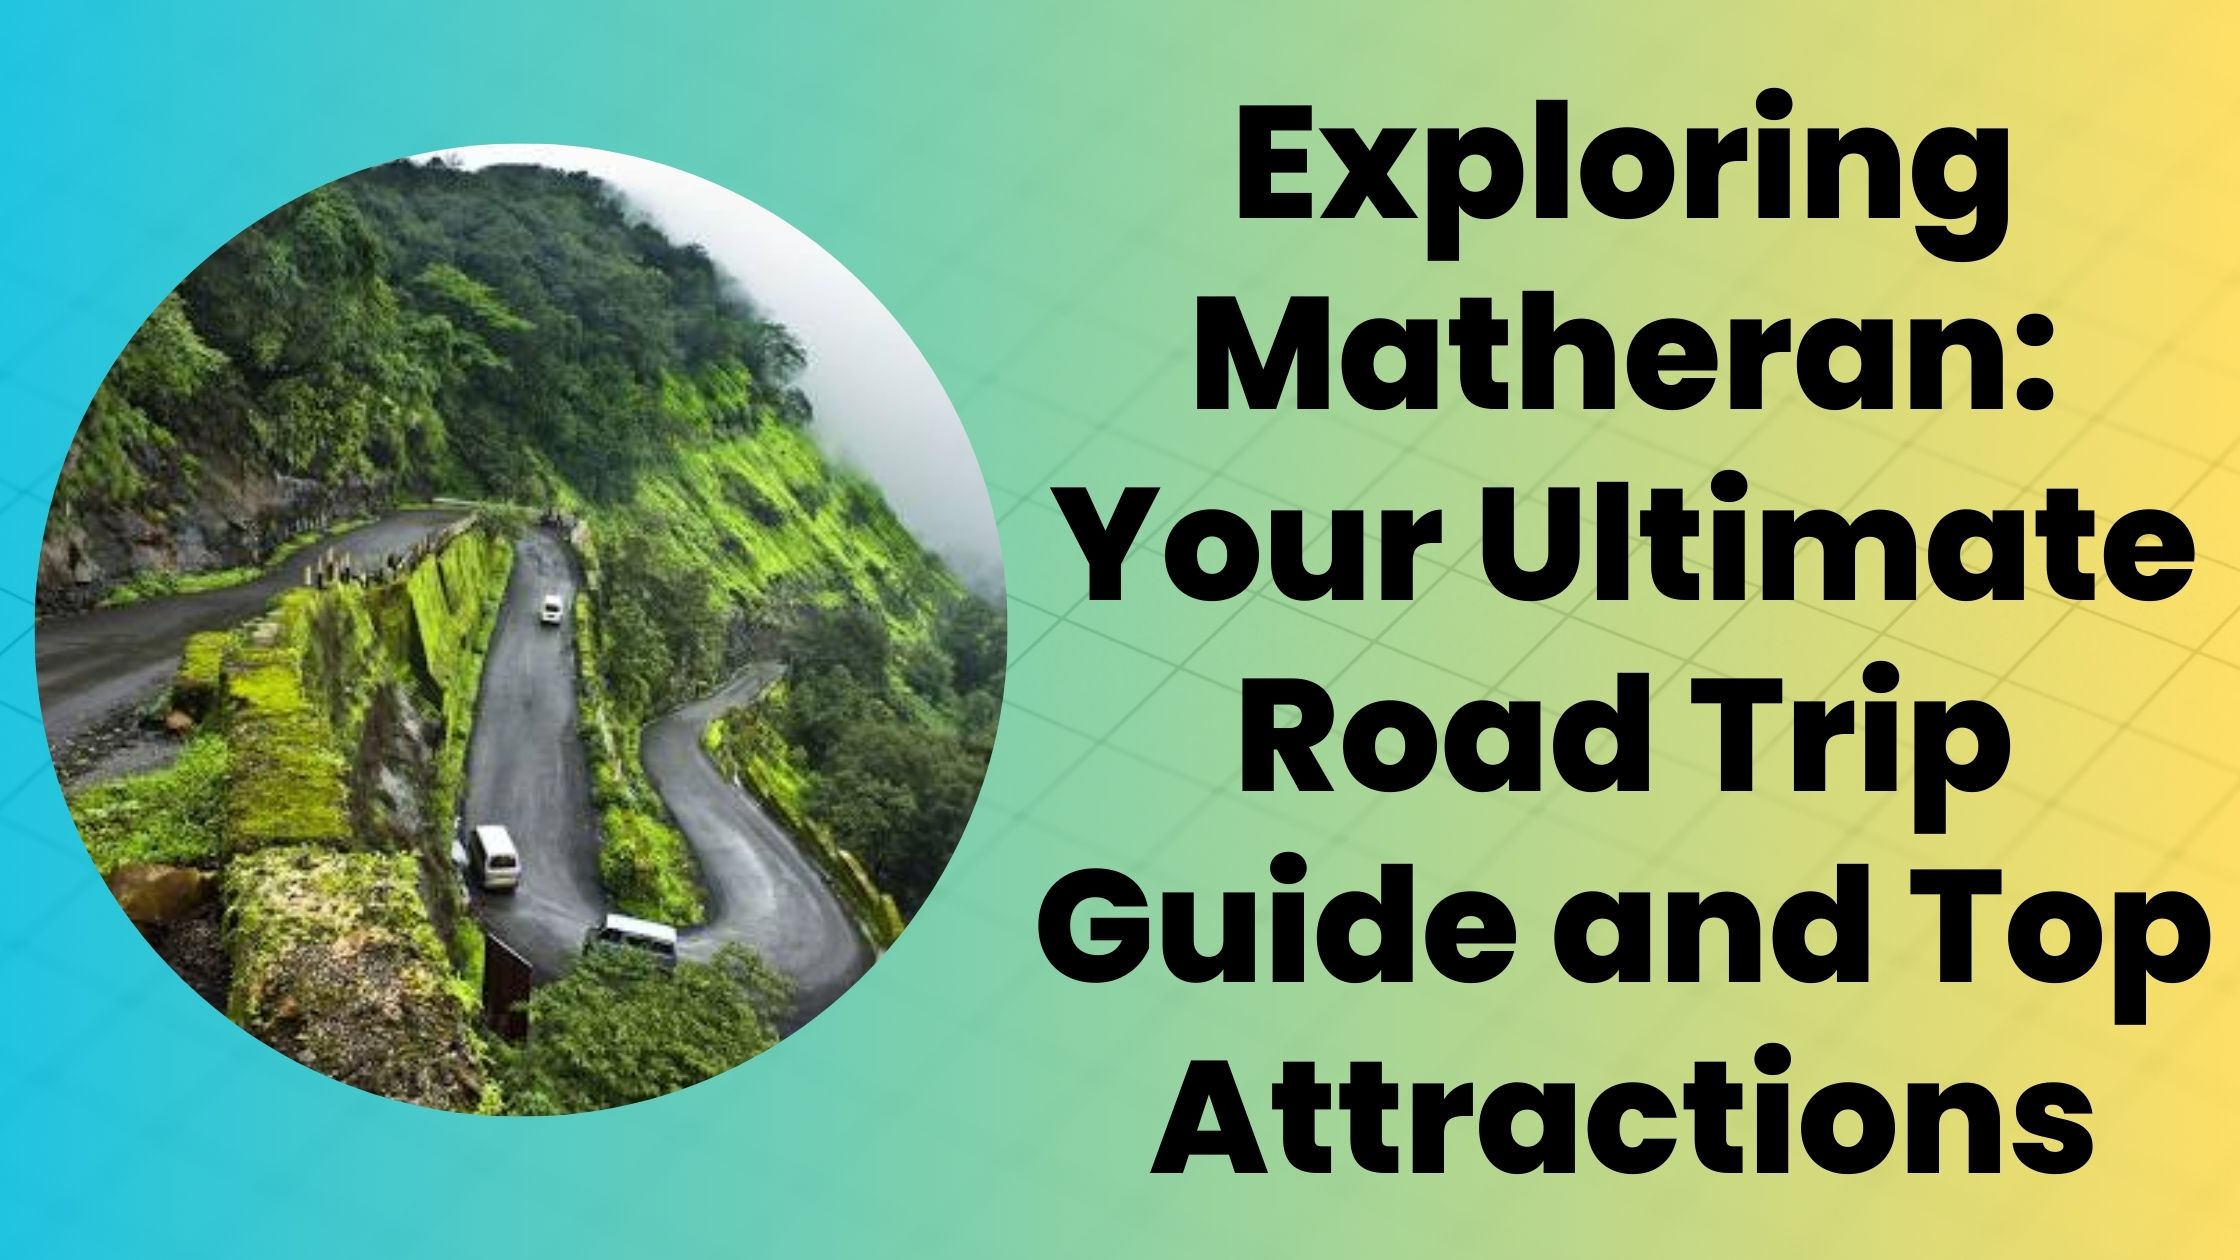 Exploring Matheran: Your Ultimate Road Trip Guide and Top Attractions